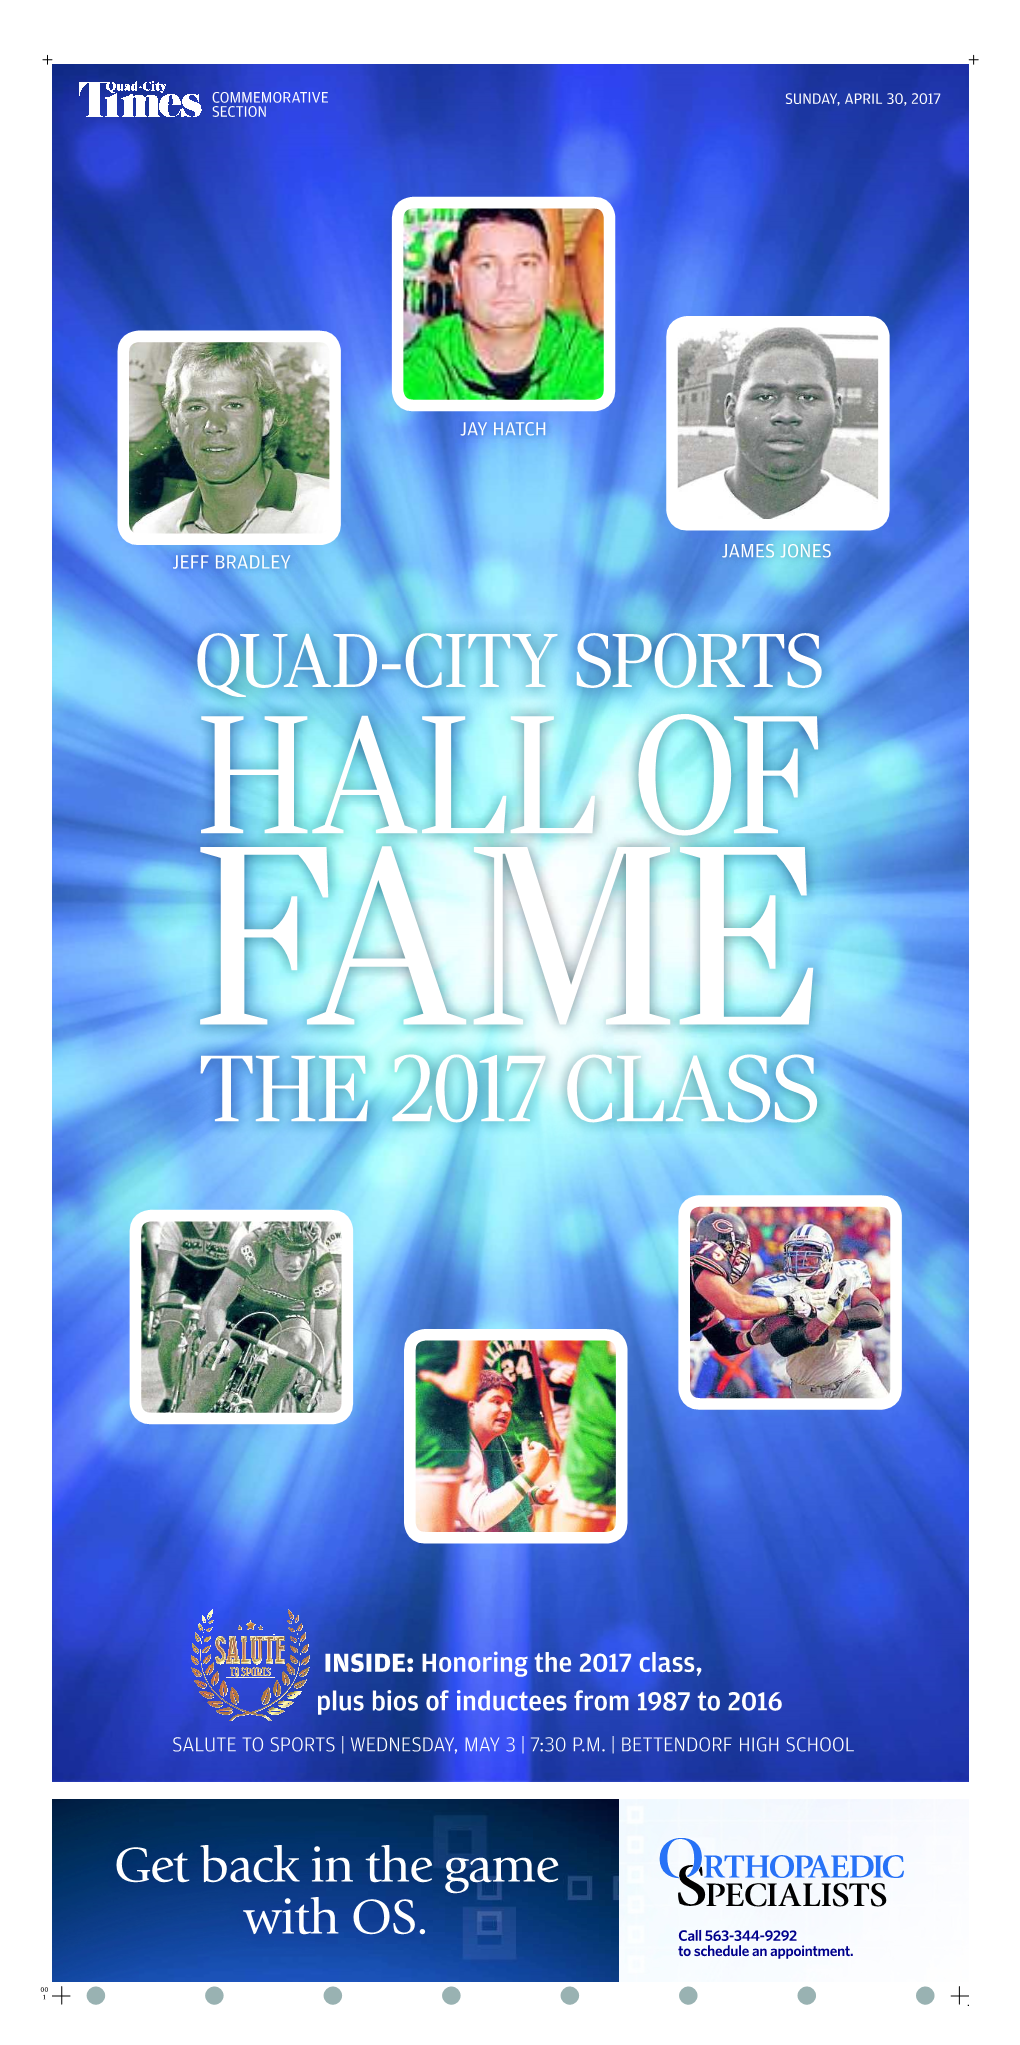 Quad-City Sports Hall of Fame the 2017 Class